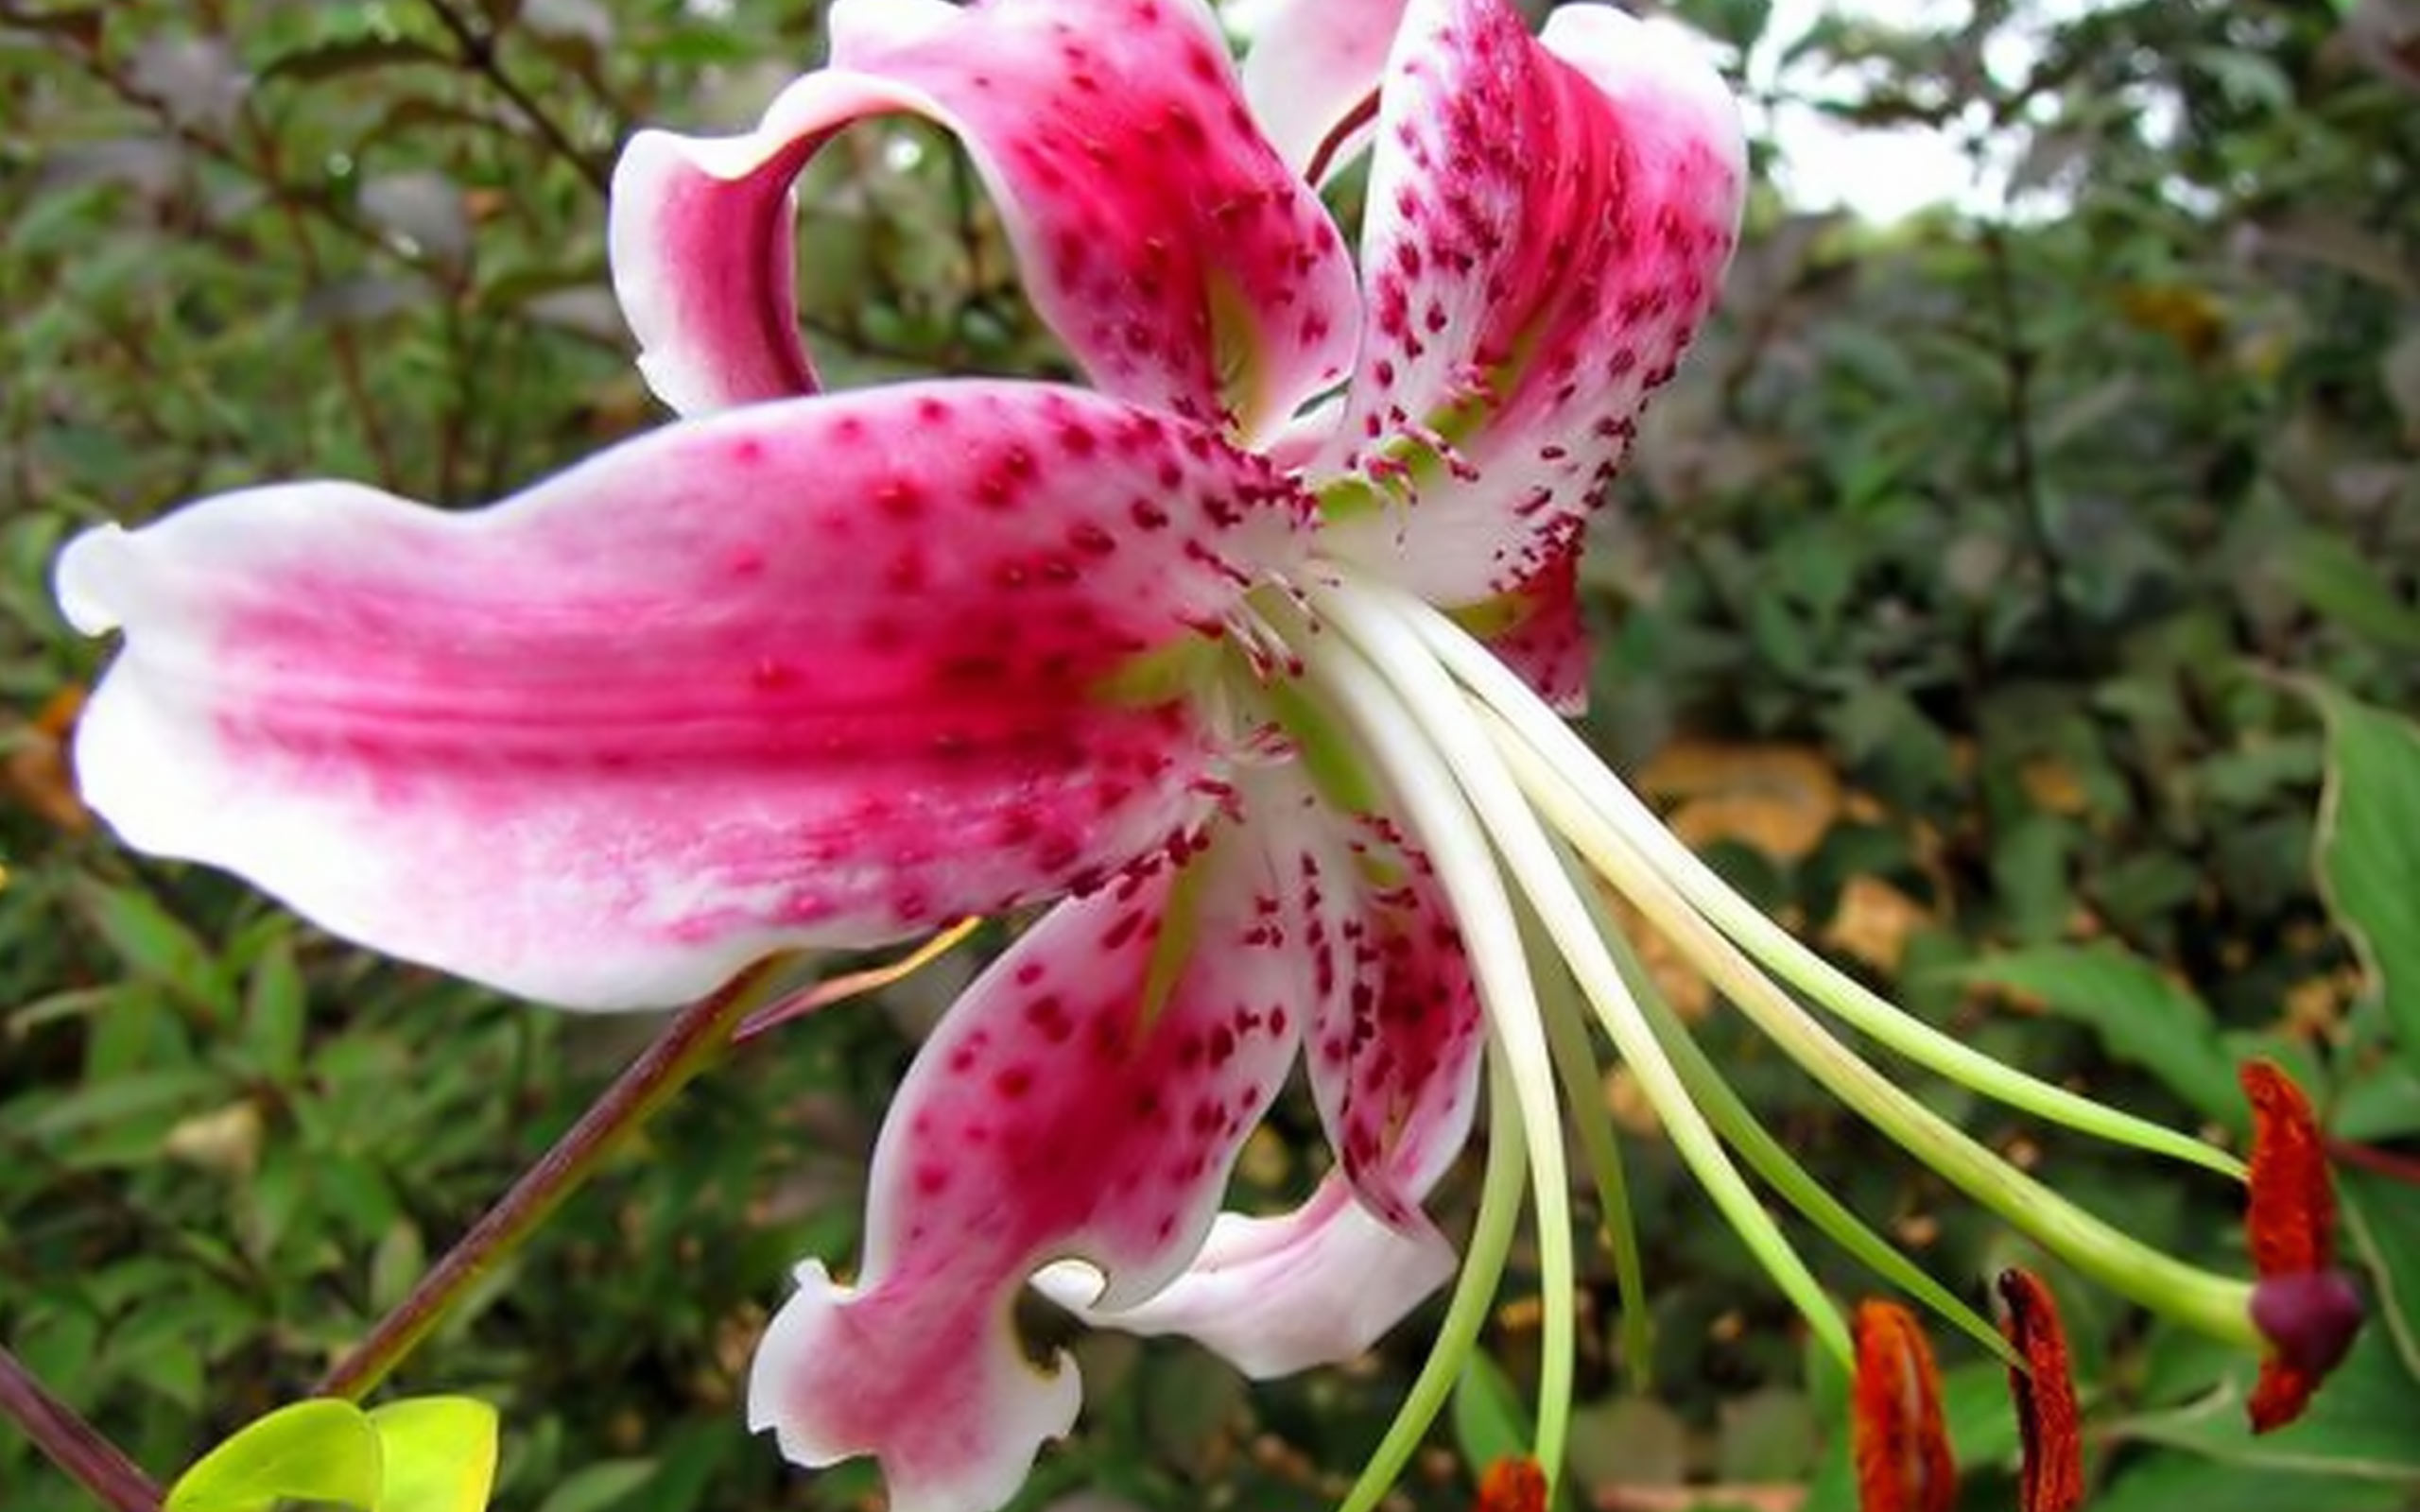 Animal Life Flowers Lily Flower Macro Photography 385050 Wallpaper wallpaper